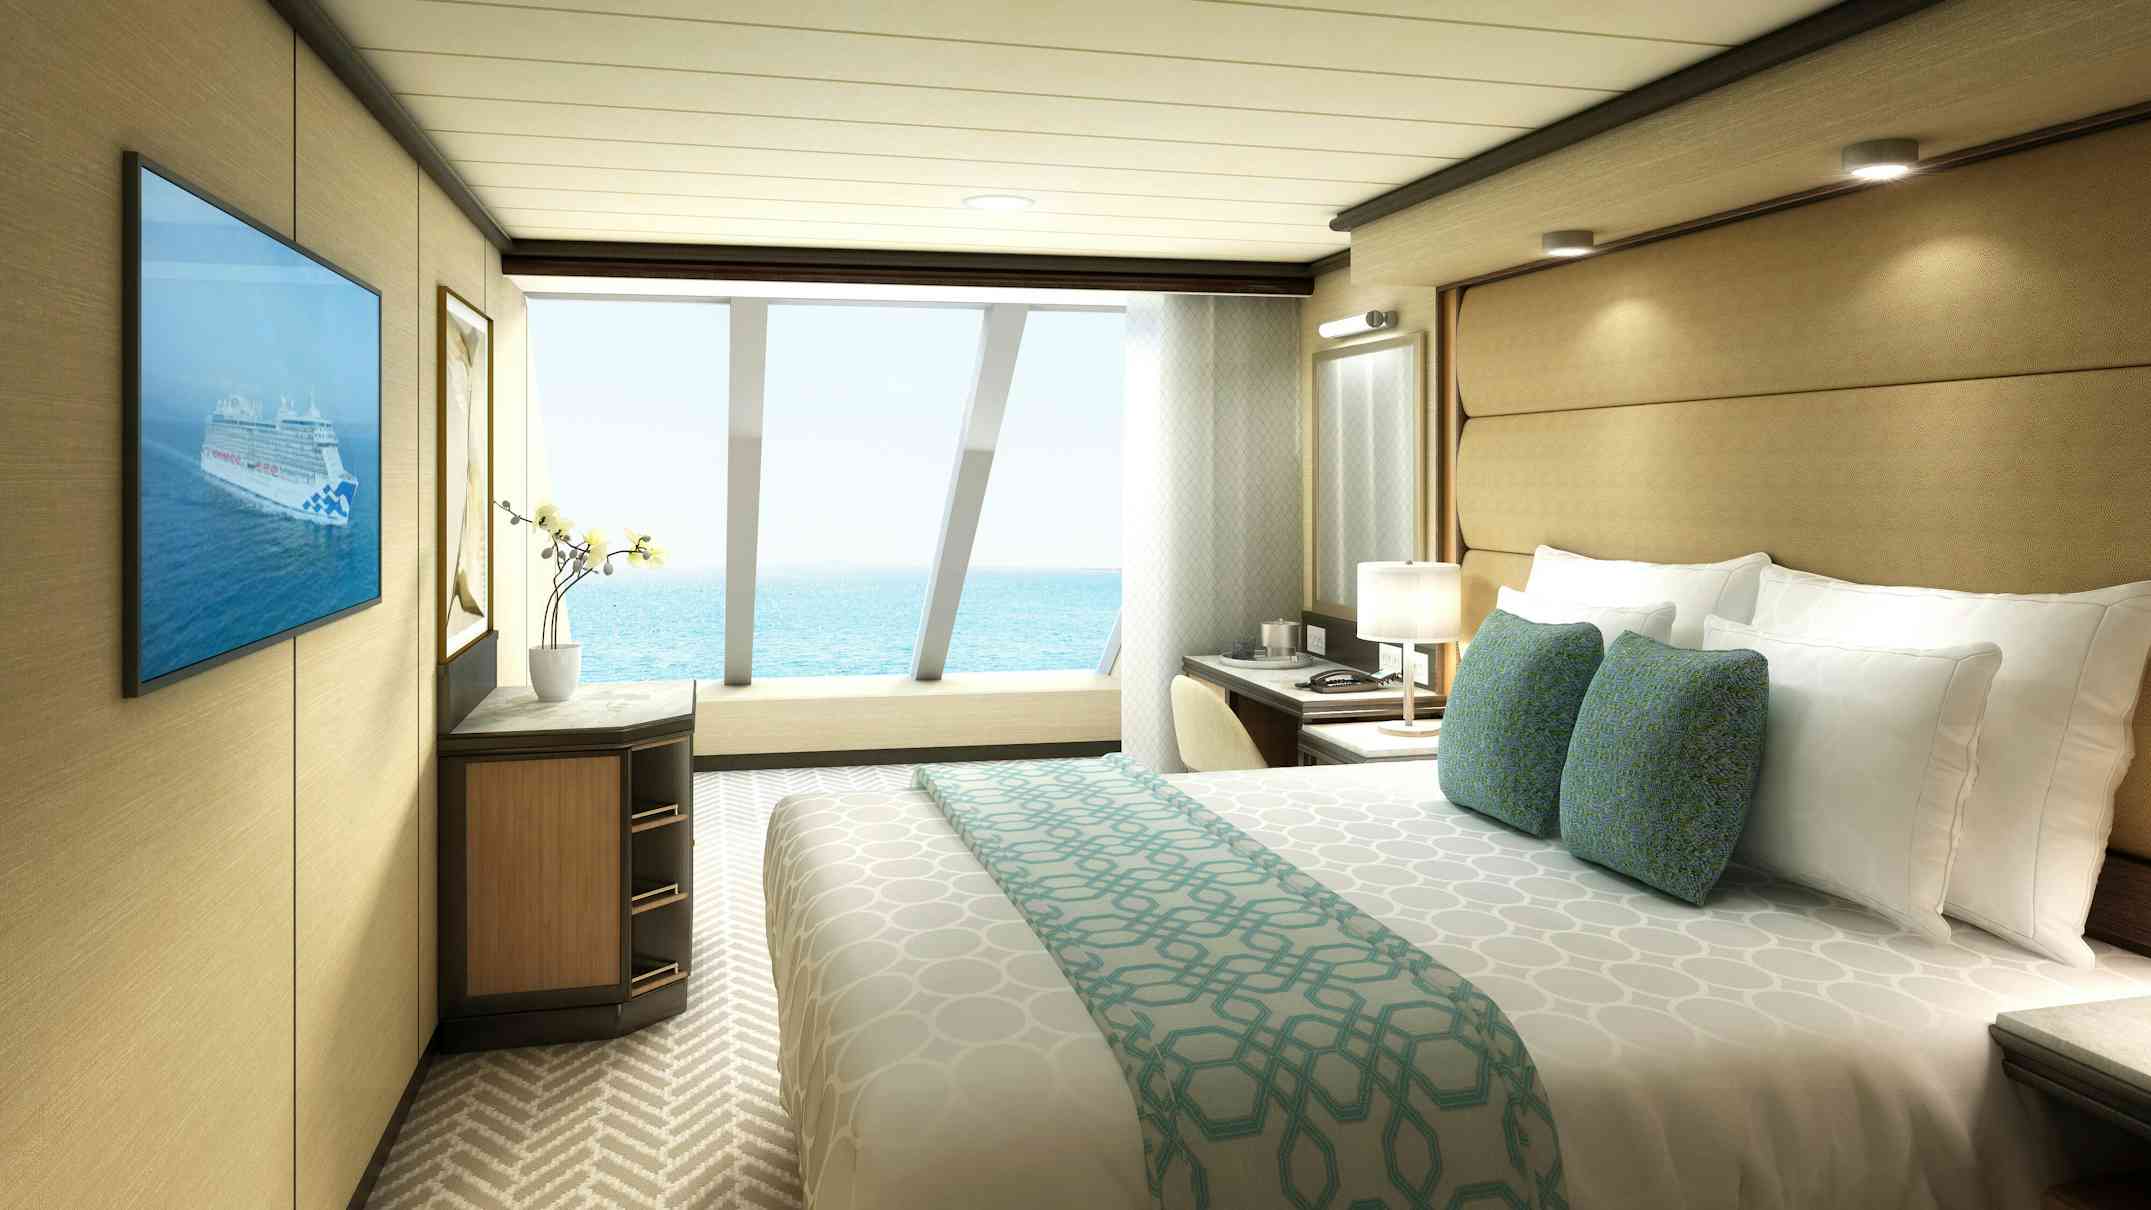 Cruise Ship Rooms, Cruise Staterooms Accommodations